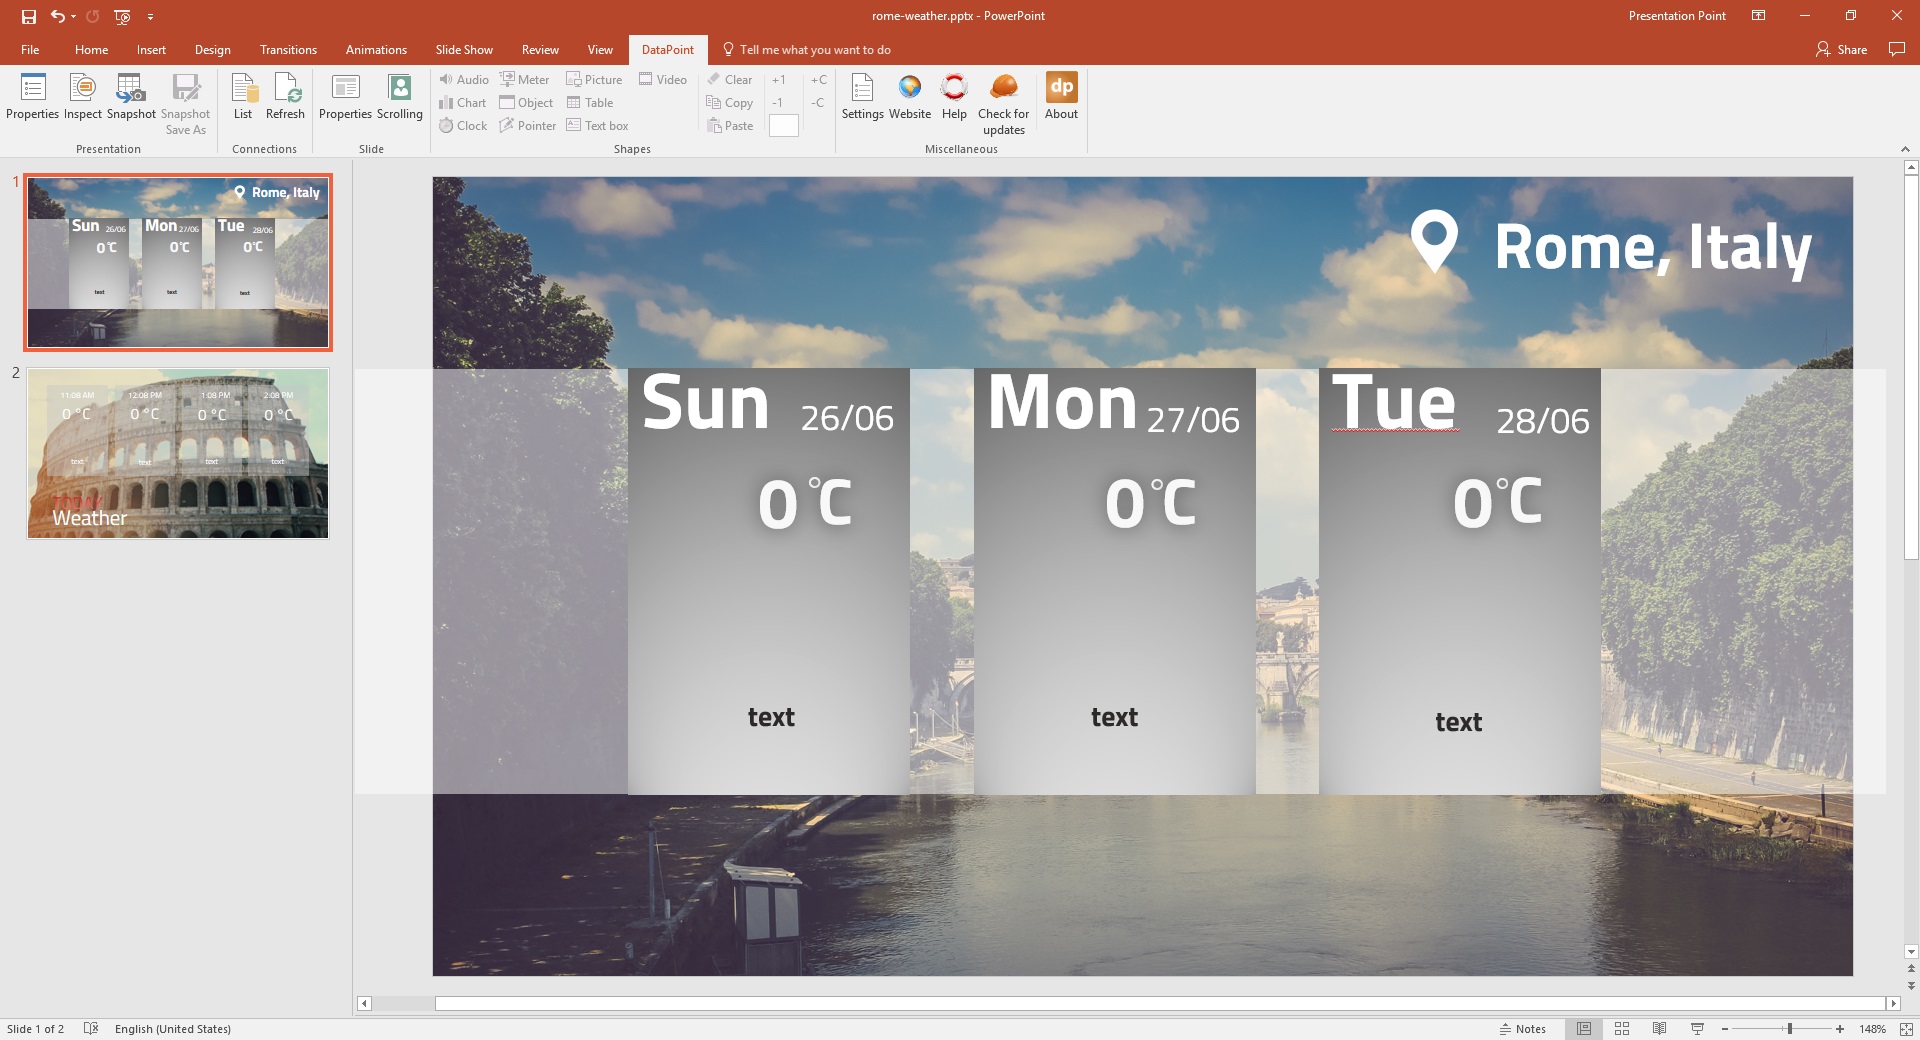 powerpoint presentation design for weather display